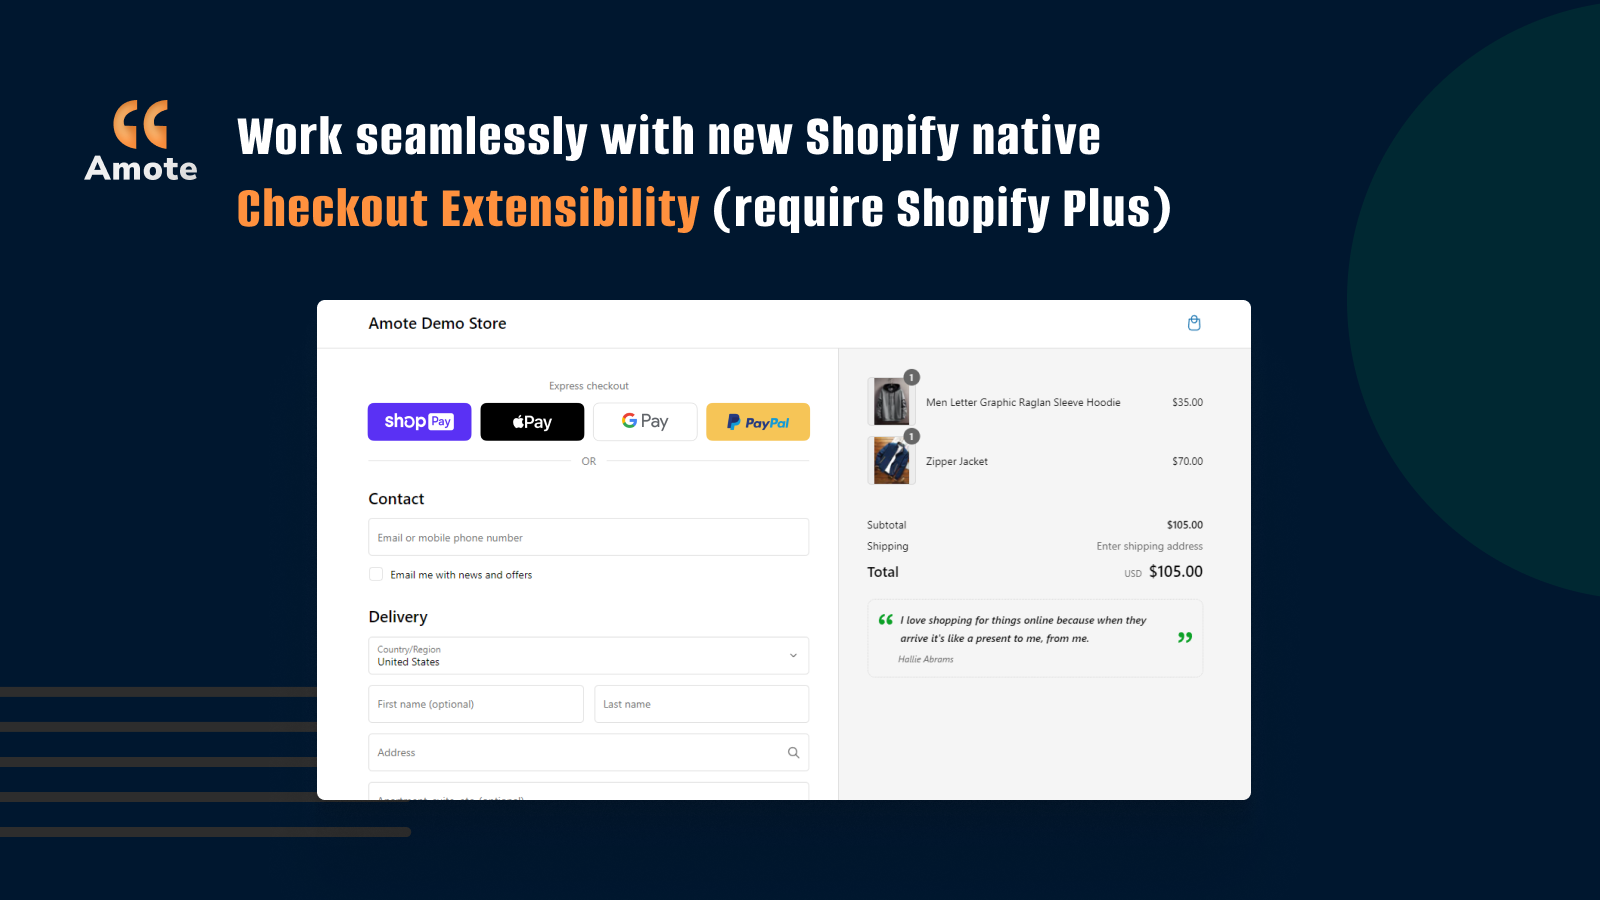 Work seamlessly with new Shopify native Checkout Extensibility